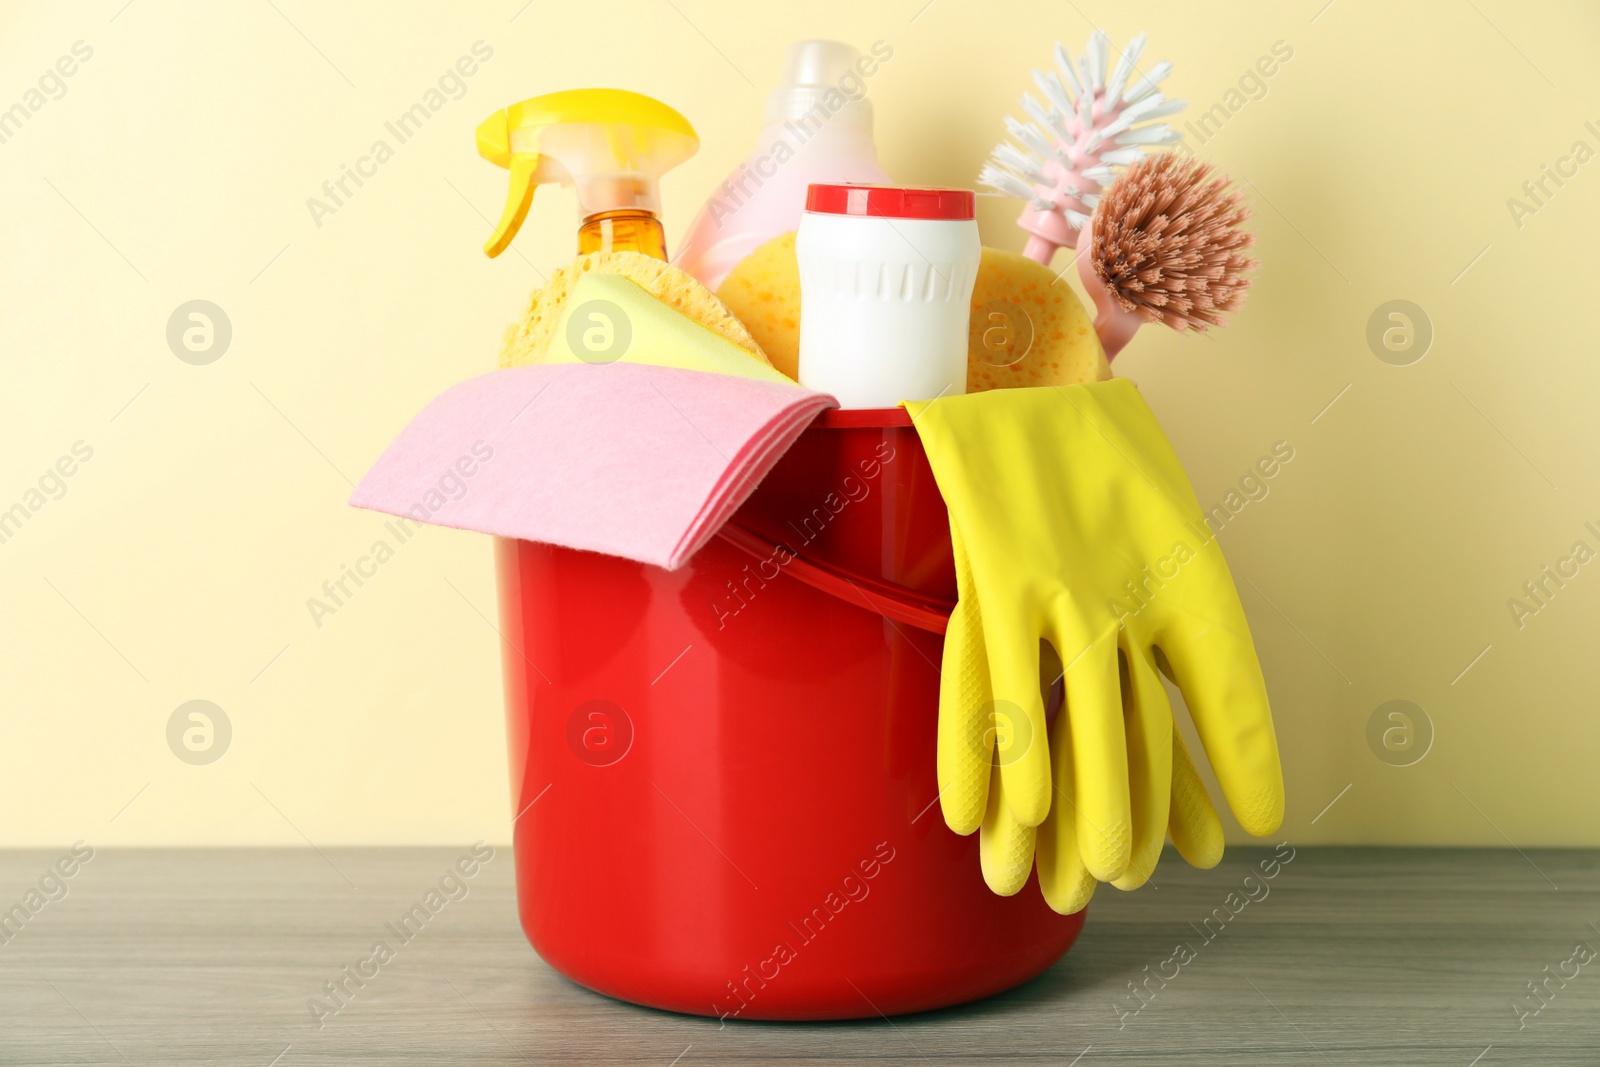 Photo of Bucket with different cleaning supplies on wooden floor near beige wall, closeup